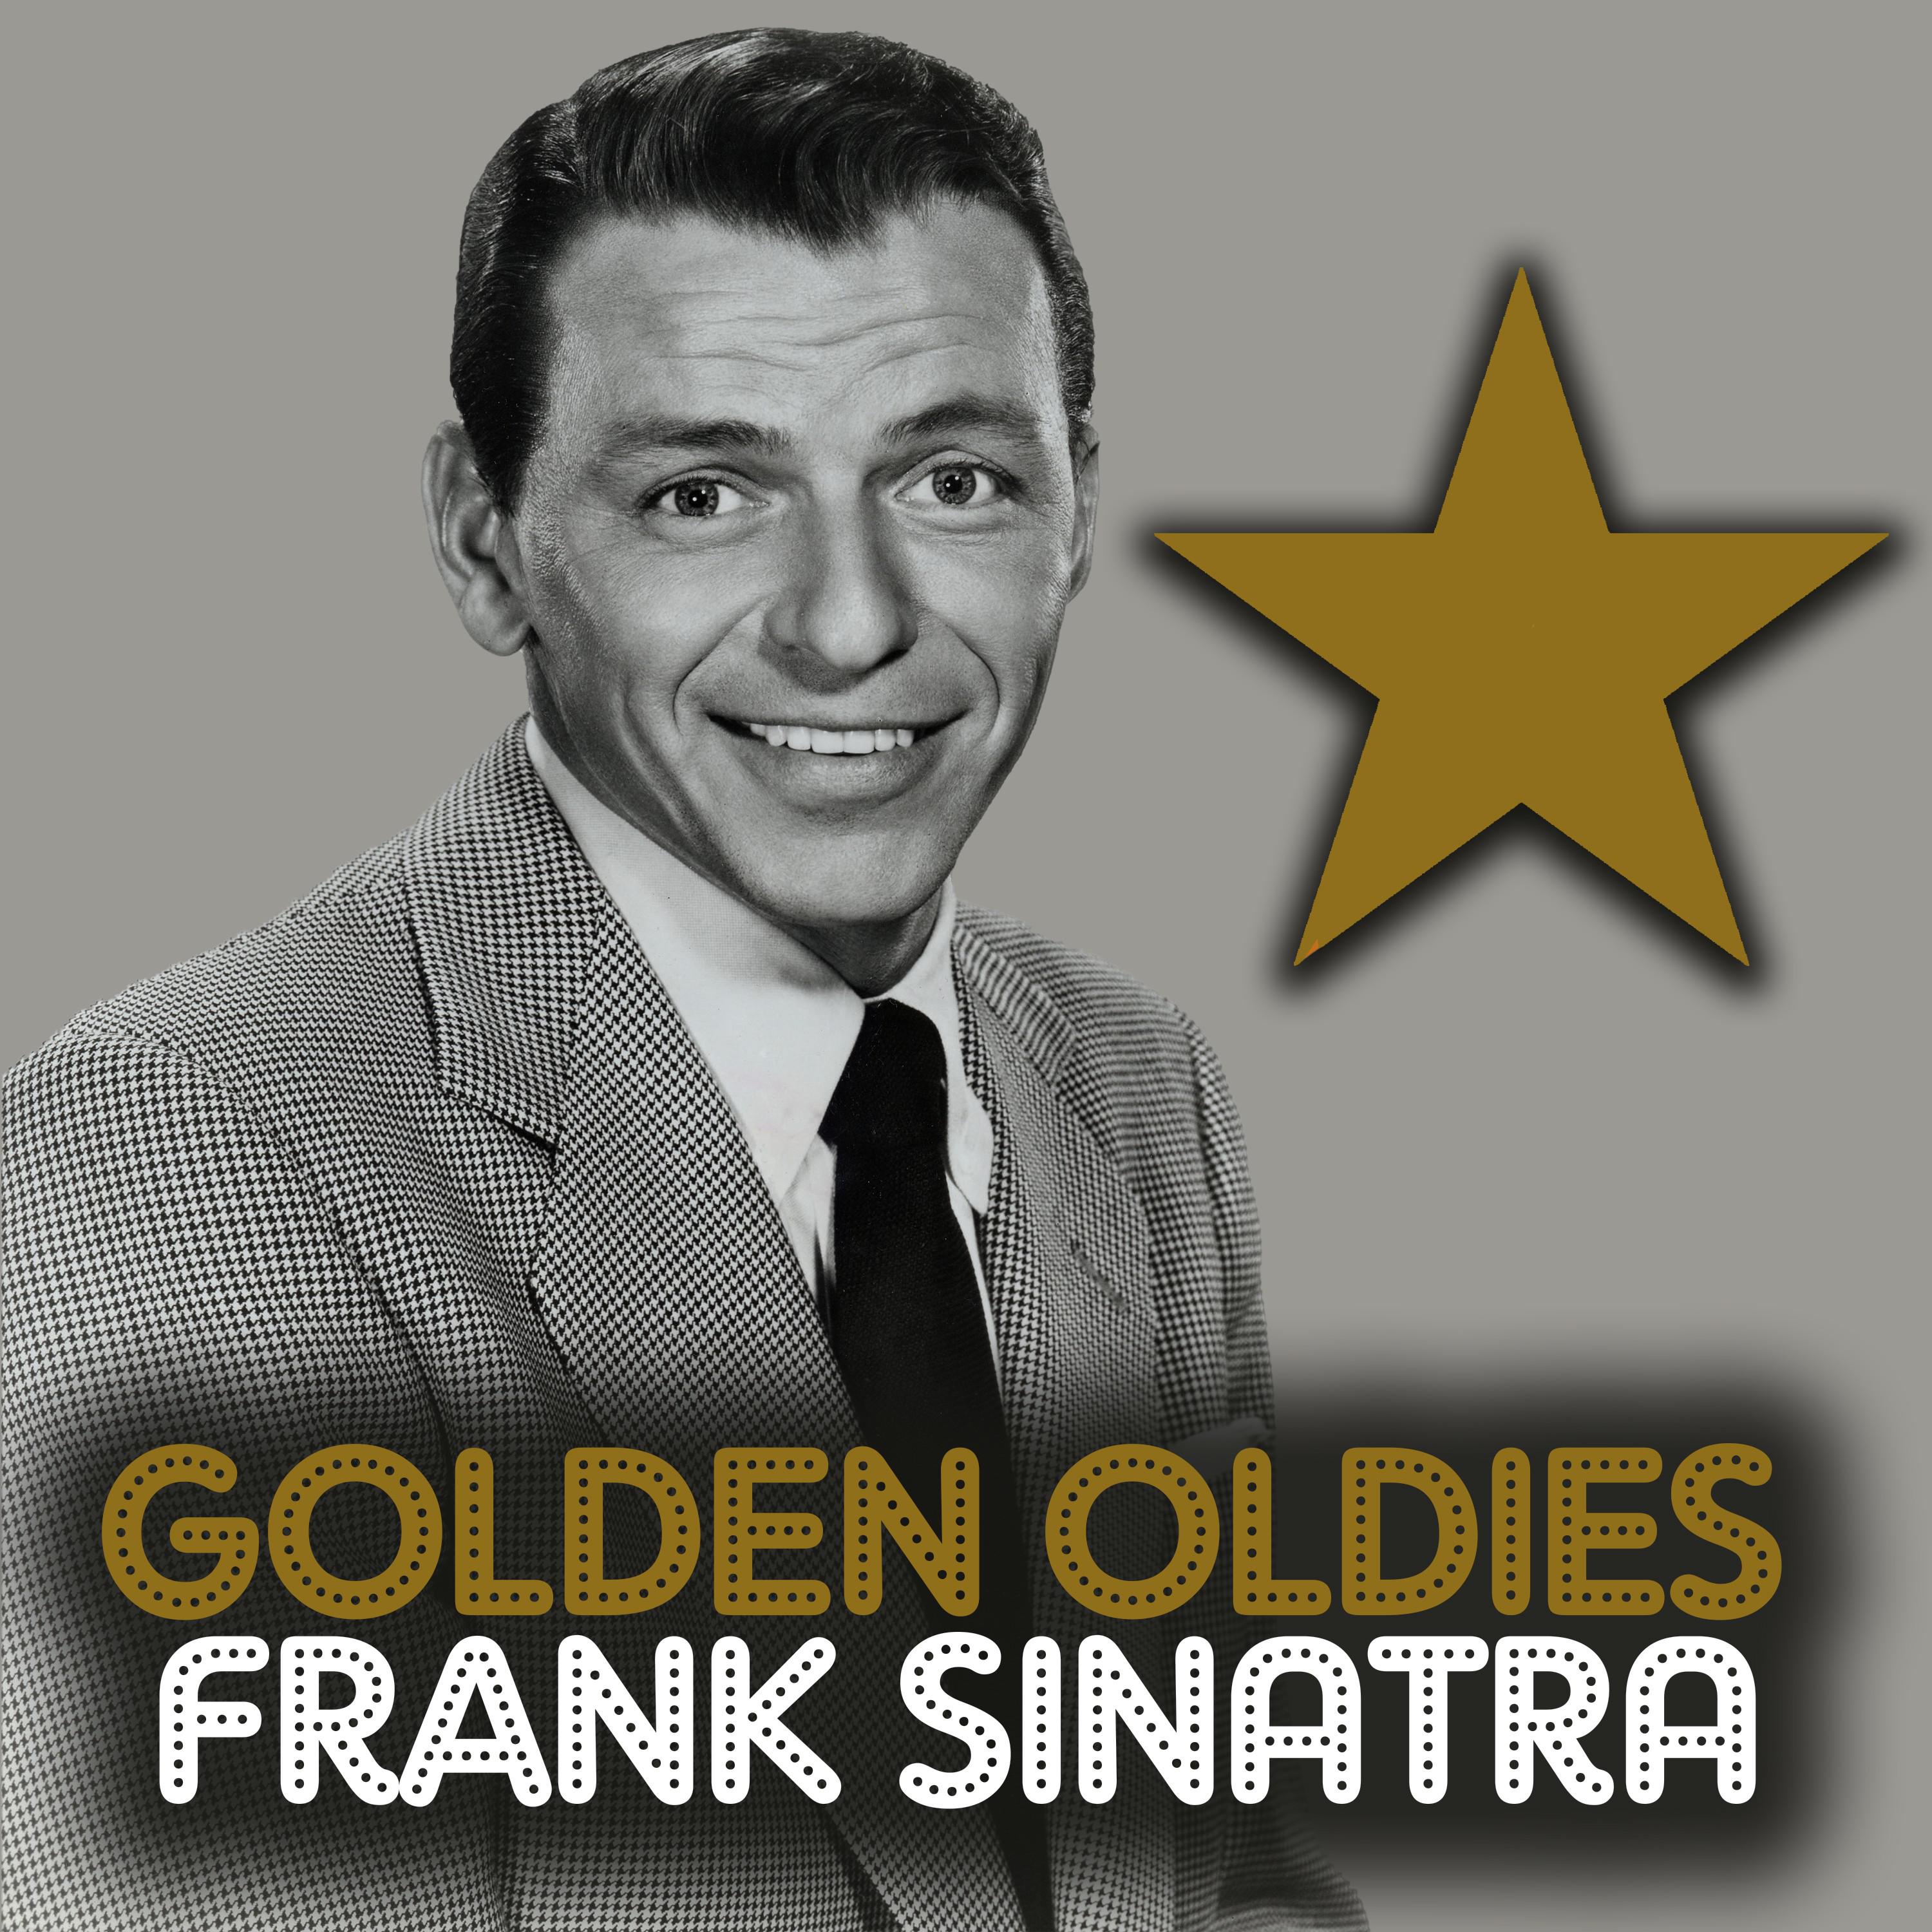 Frank Sinatra - My Star (Entertainers)